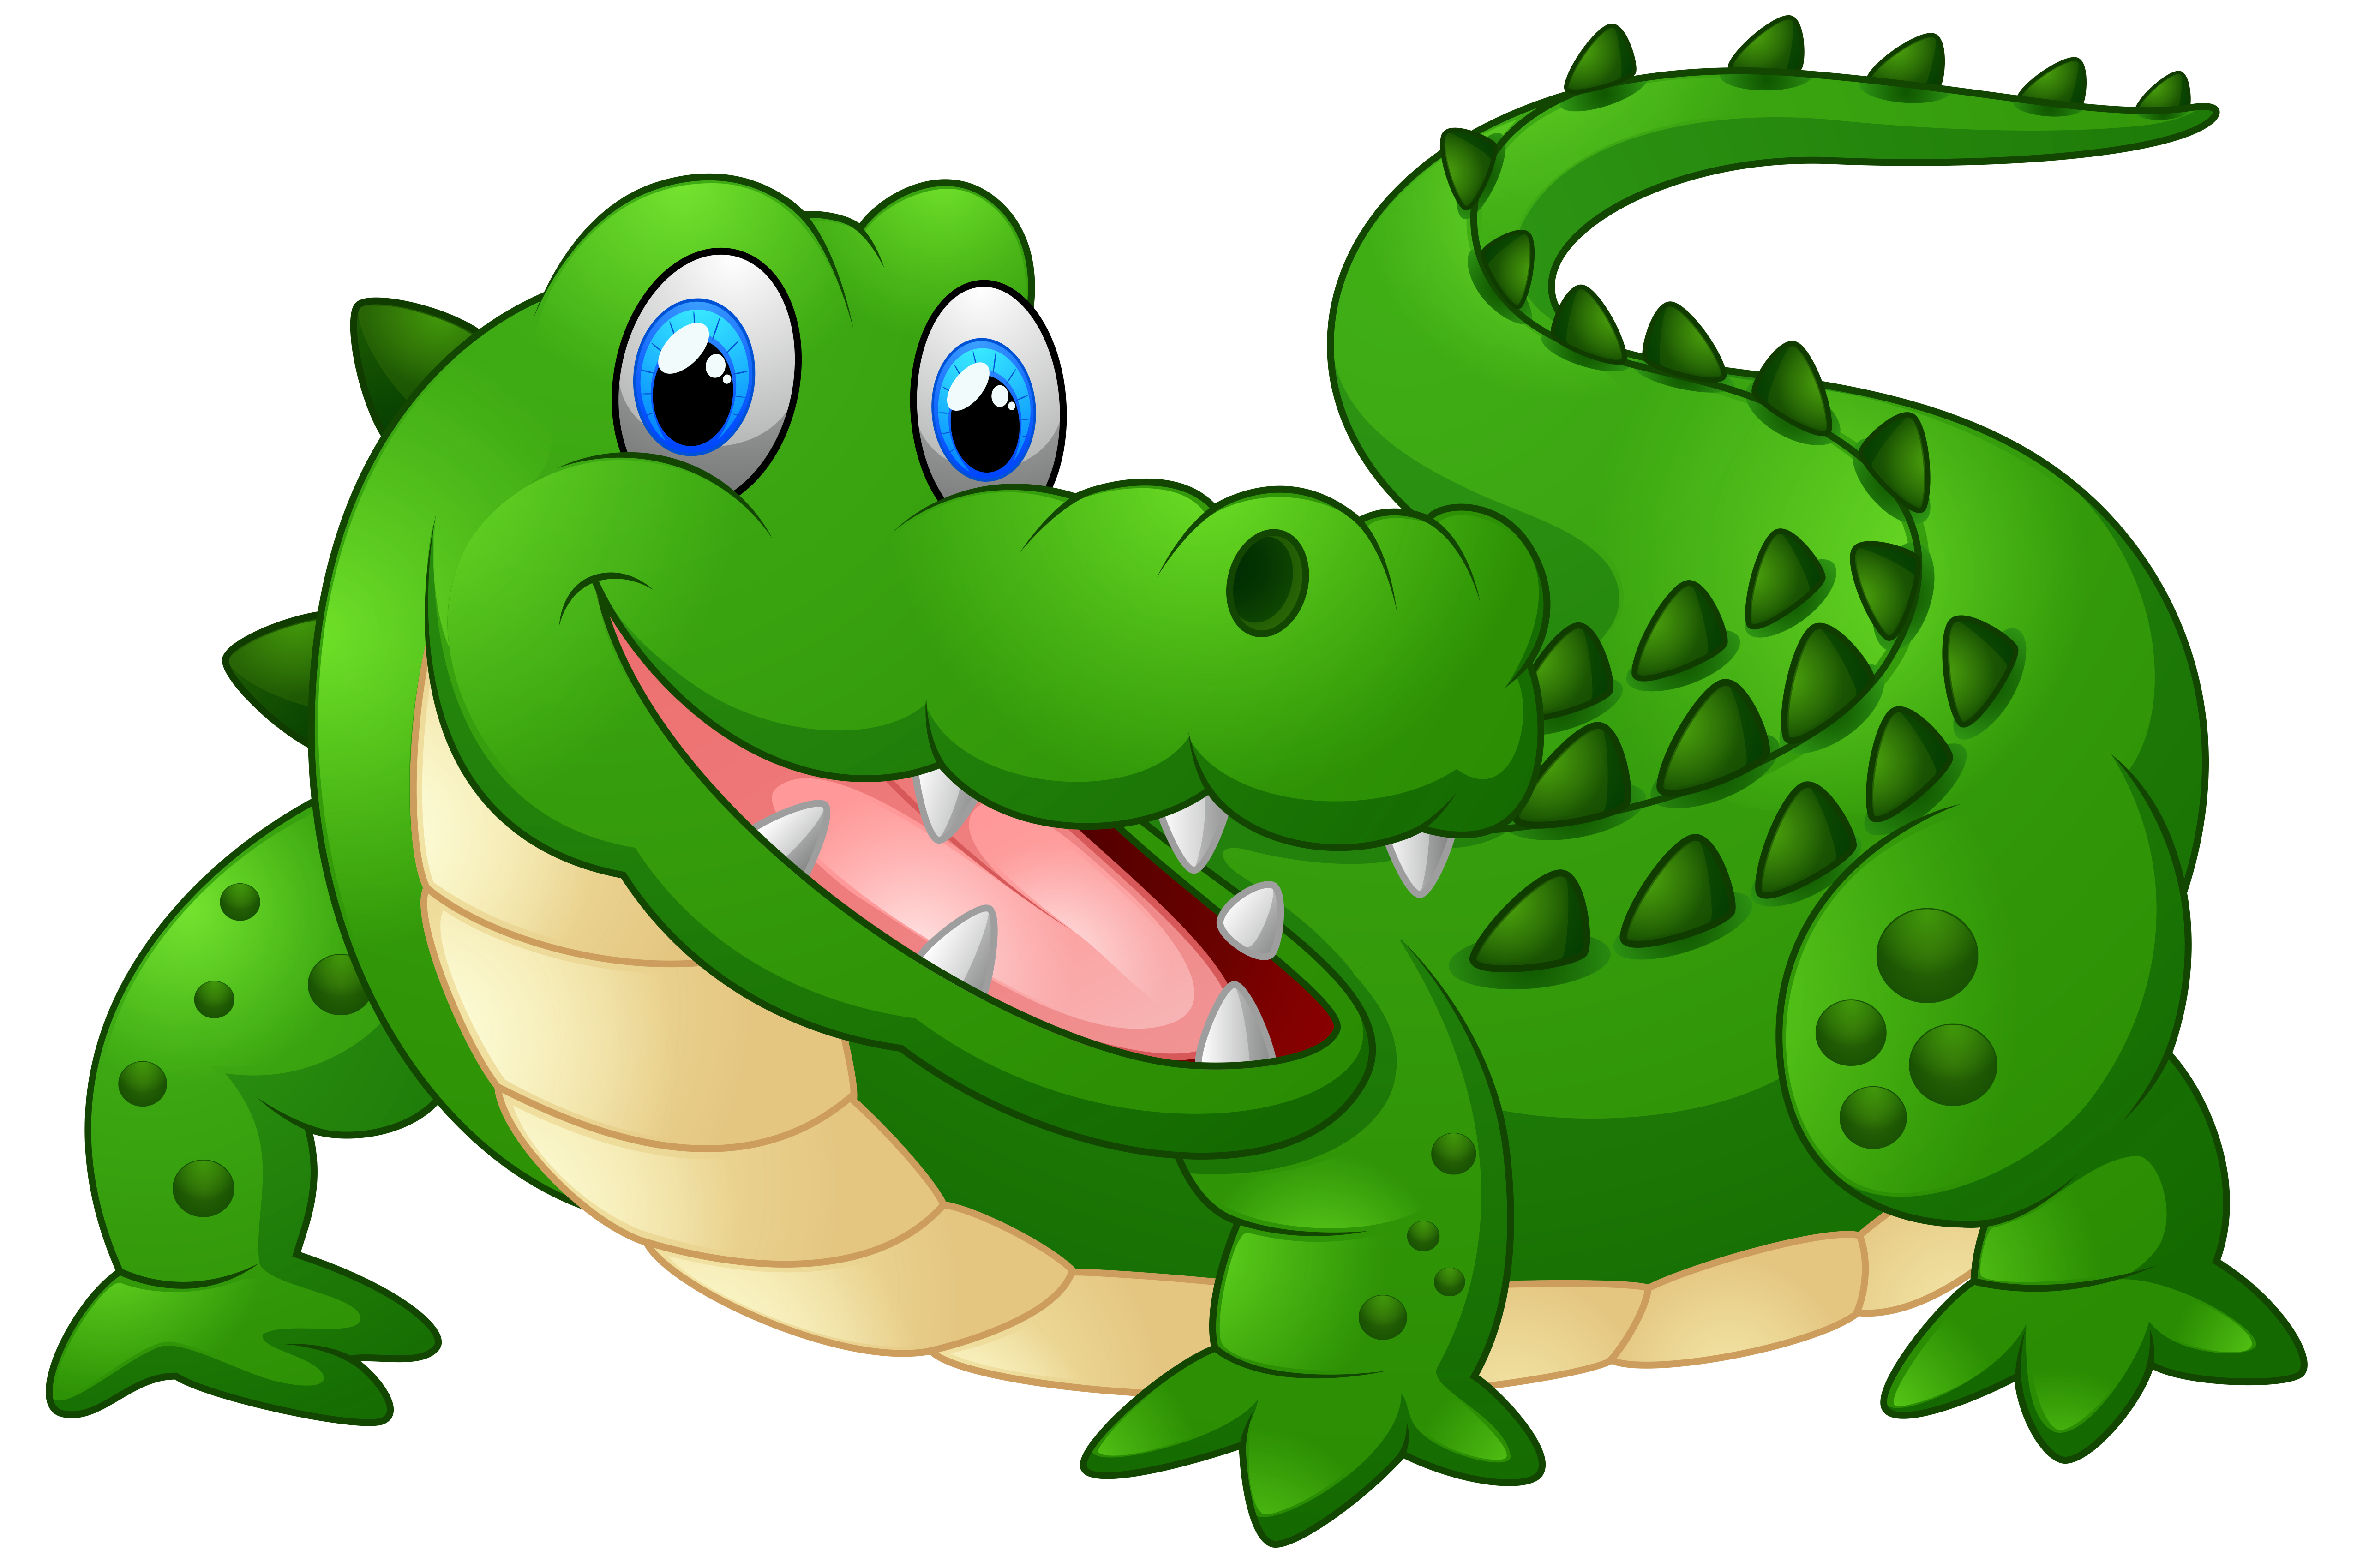 Pin by ko on. Eyes clipart alligator